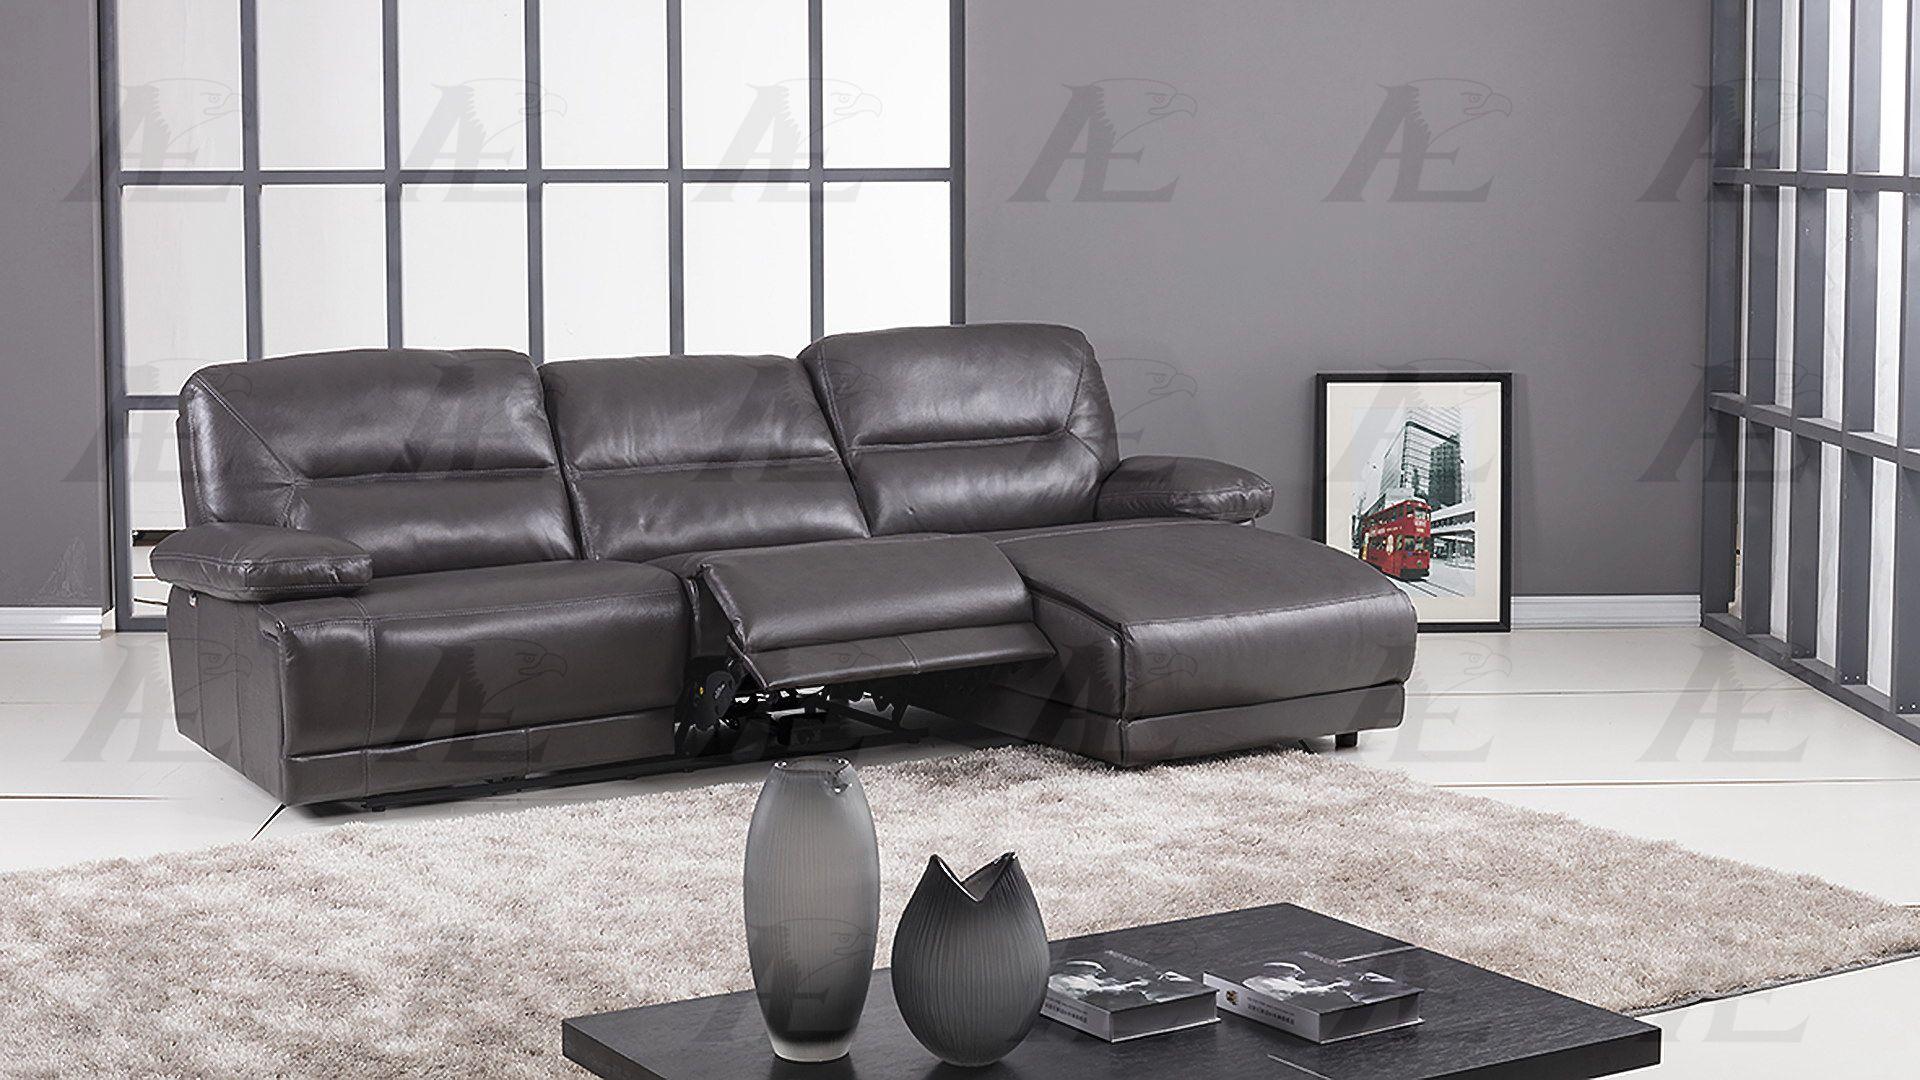 

    
American Eagle Furniture EK-L079-DG Dark Gray Sectional Recliner Sofa Chaise Right Hand Chase Full Leather 2Pcs
